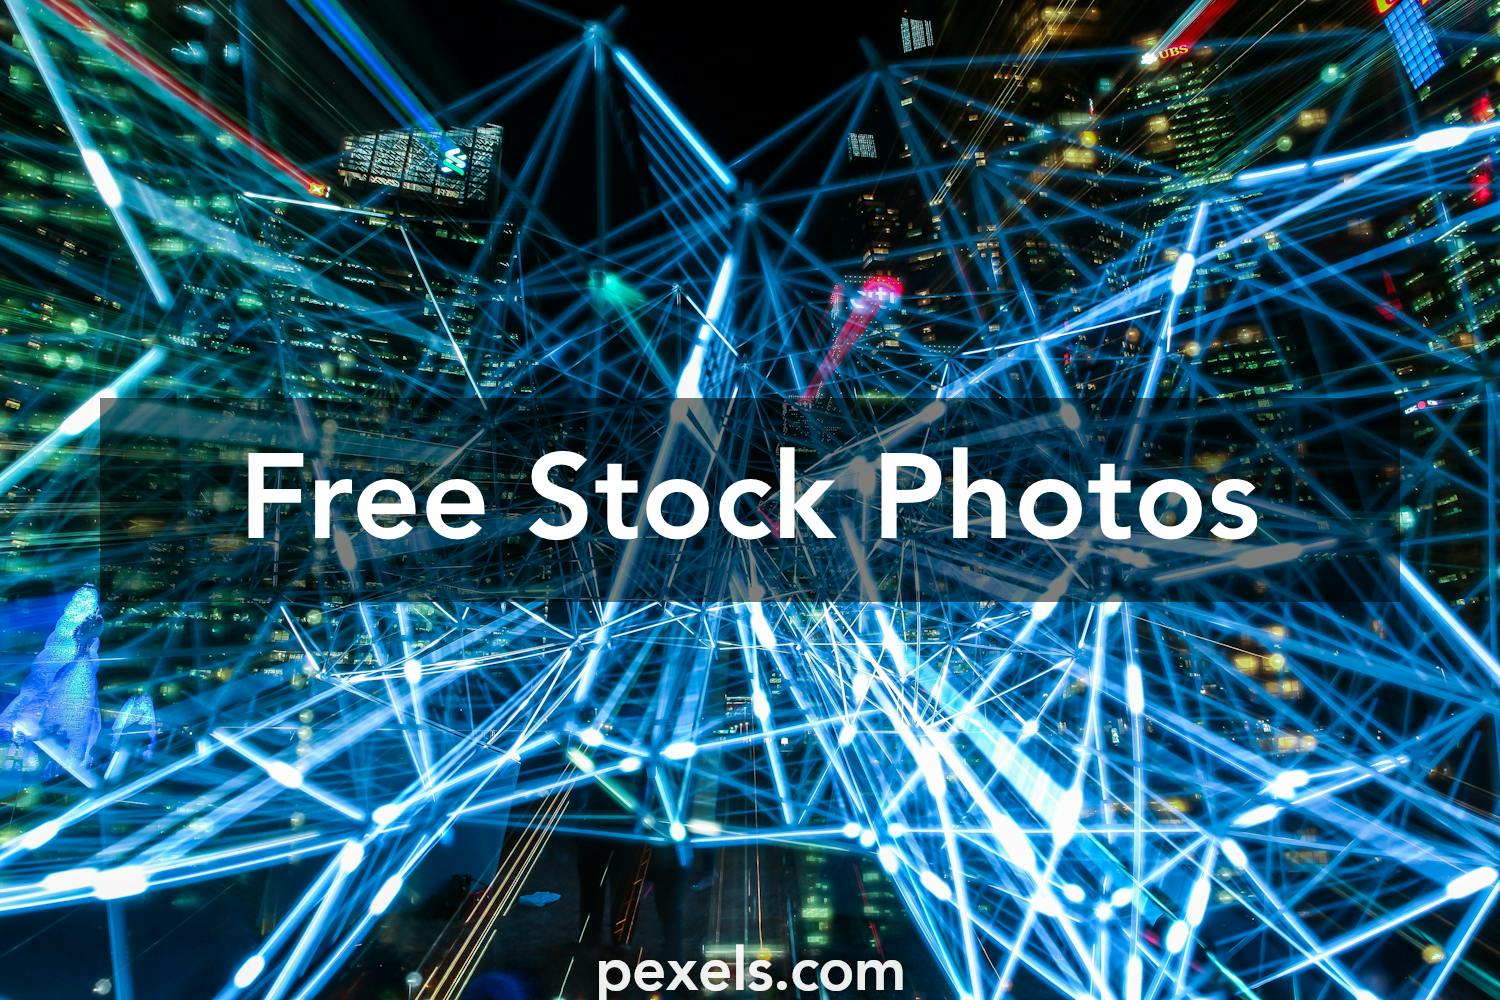 10 000 Best Information Technology Photos 100 Free Download Pexels Stock Photos New and best 97,000 of desktop wallpapers, hd backgrounds for pc & mac, laptop, tablet, mobile phone. pexels stock photos